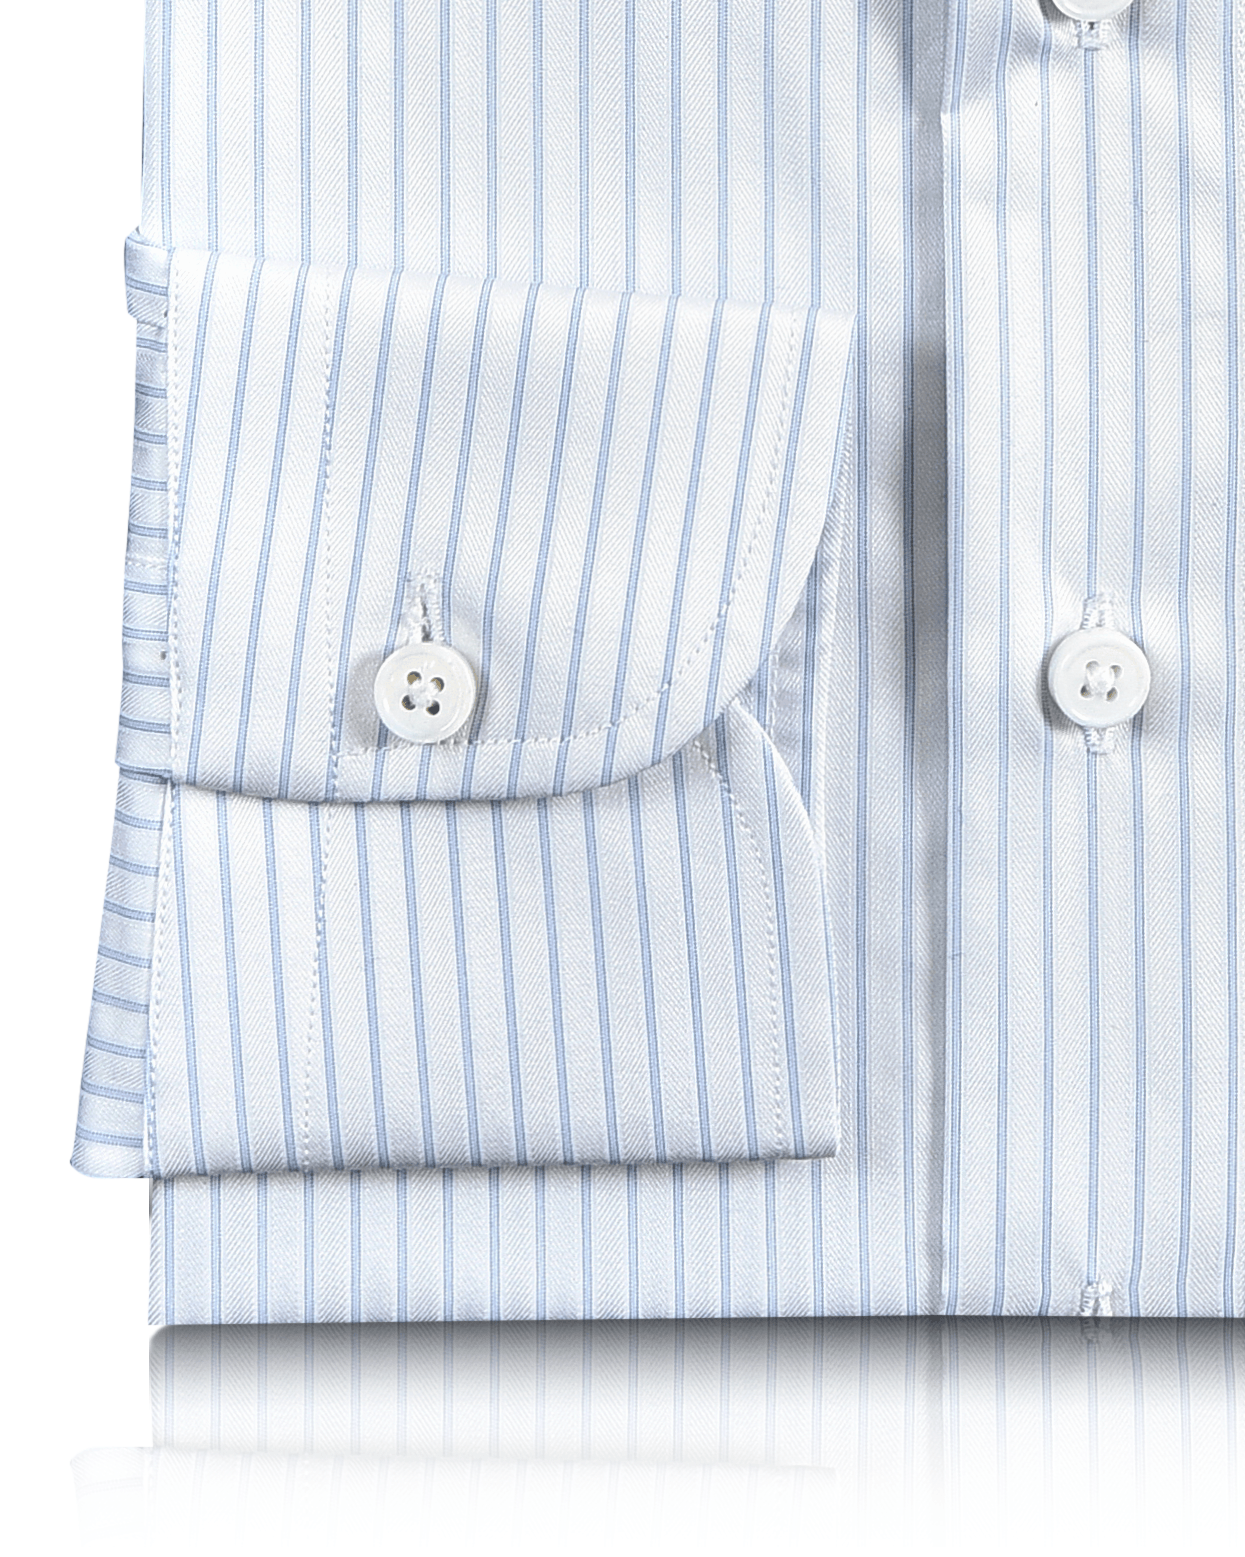 Luxire Priviledge: Pale Blue Pin Stripes On White Dobby Shirt